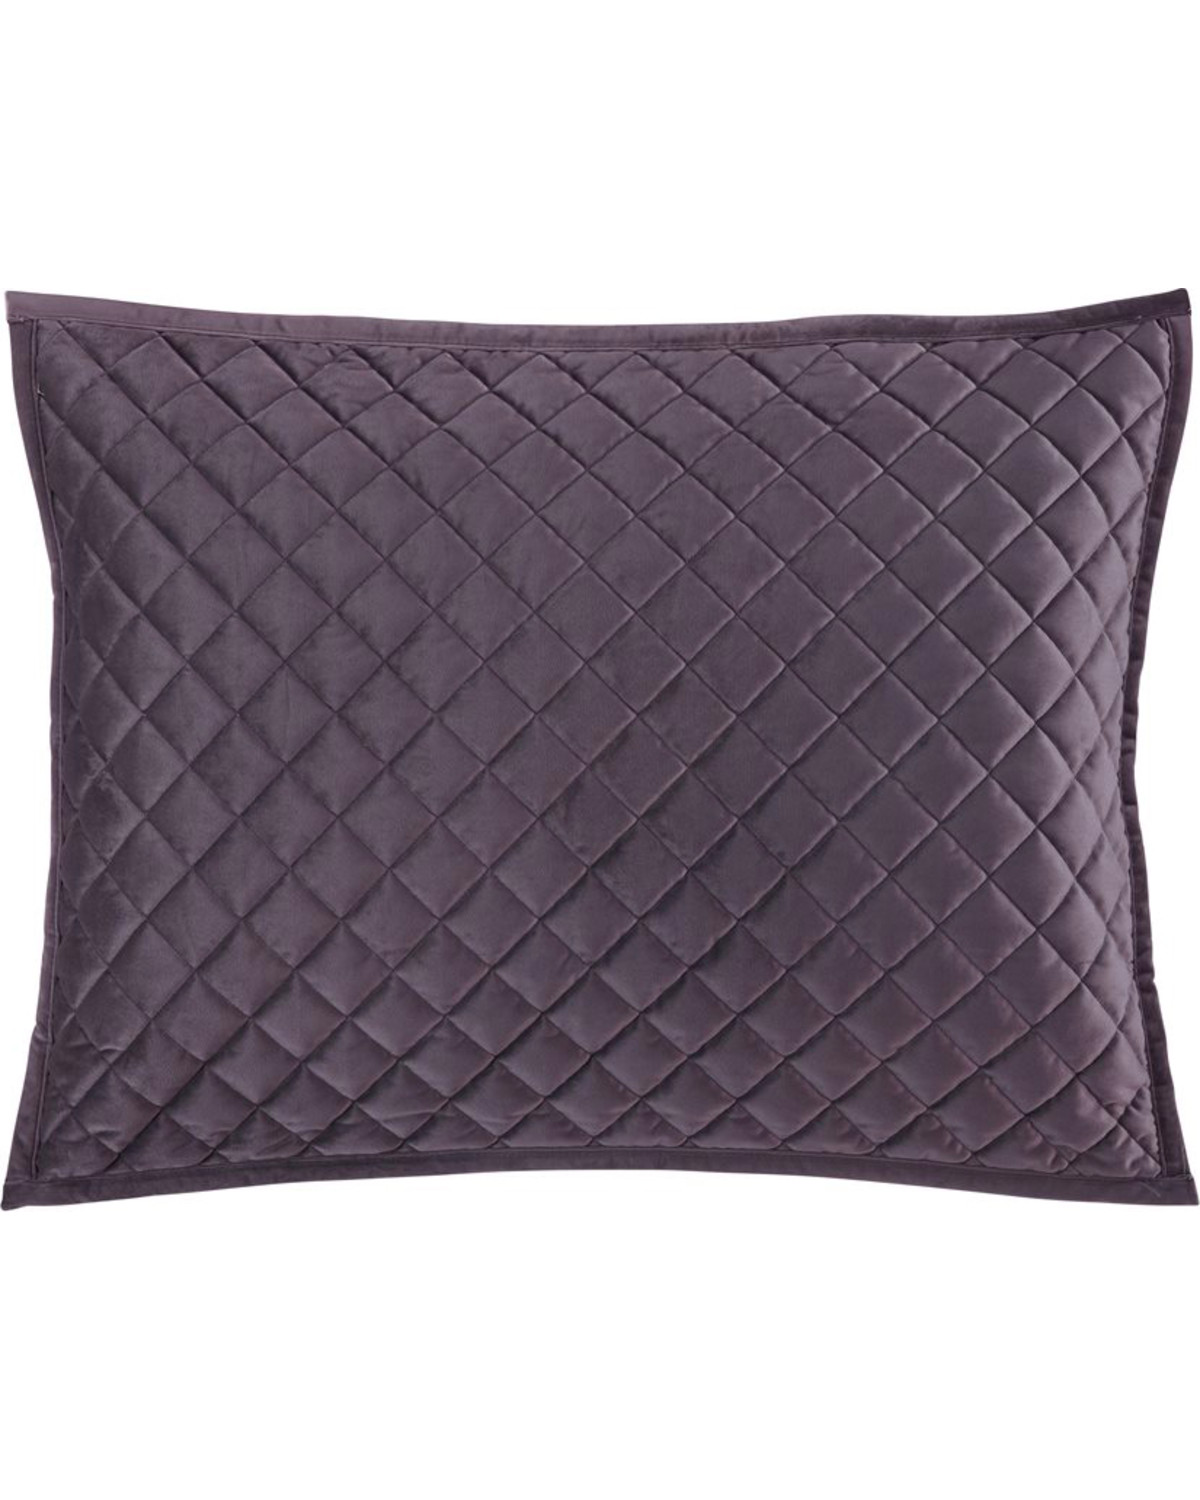 HiEnd Accents King Amethyst Diamond Quilted Shams